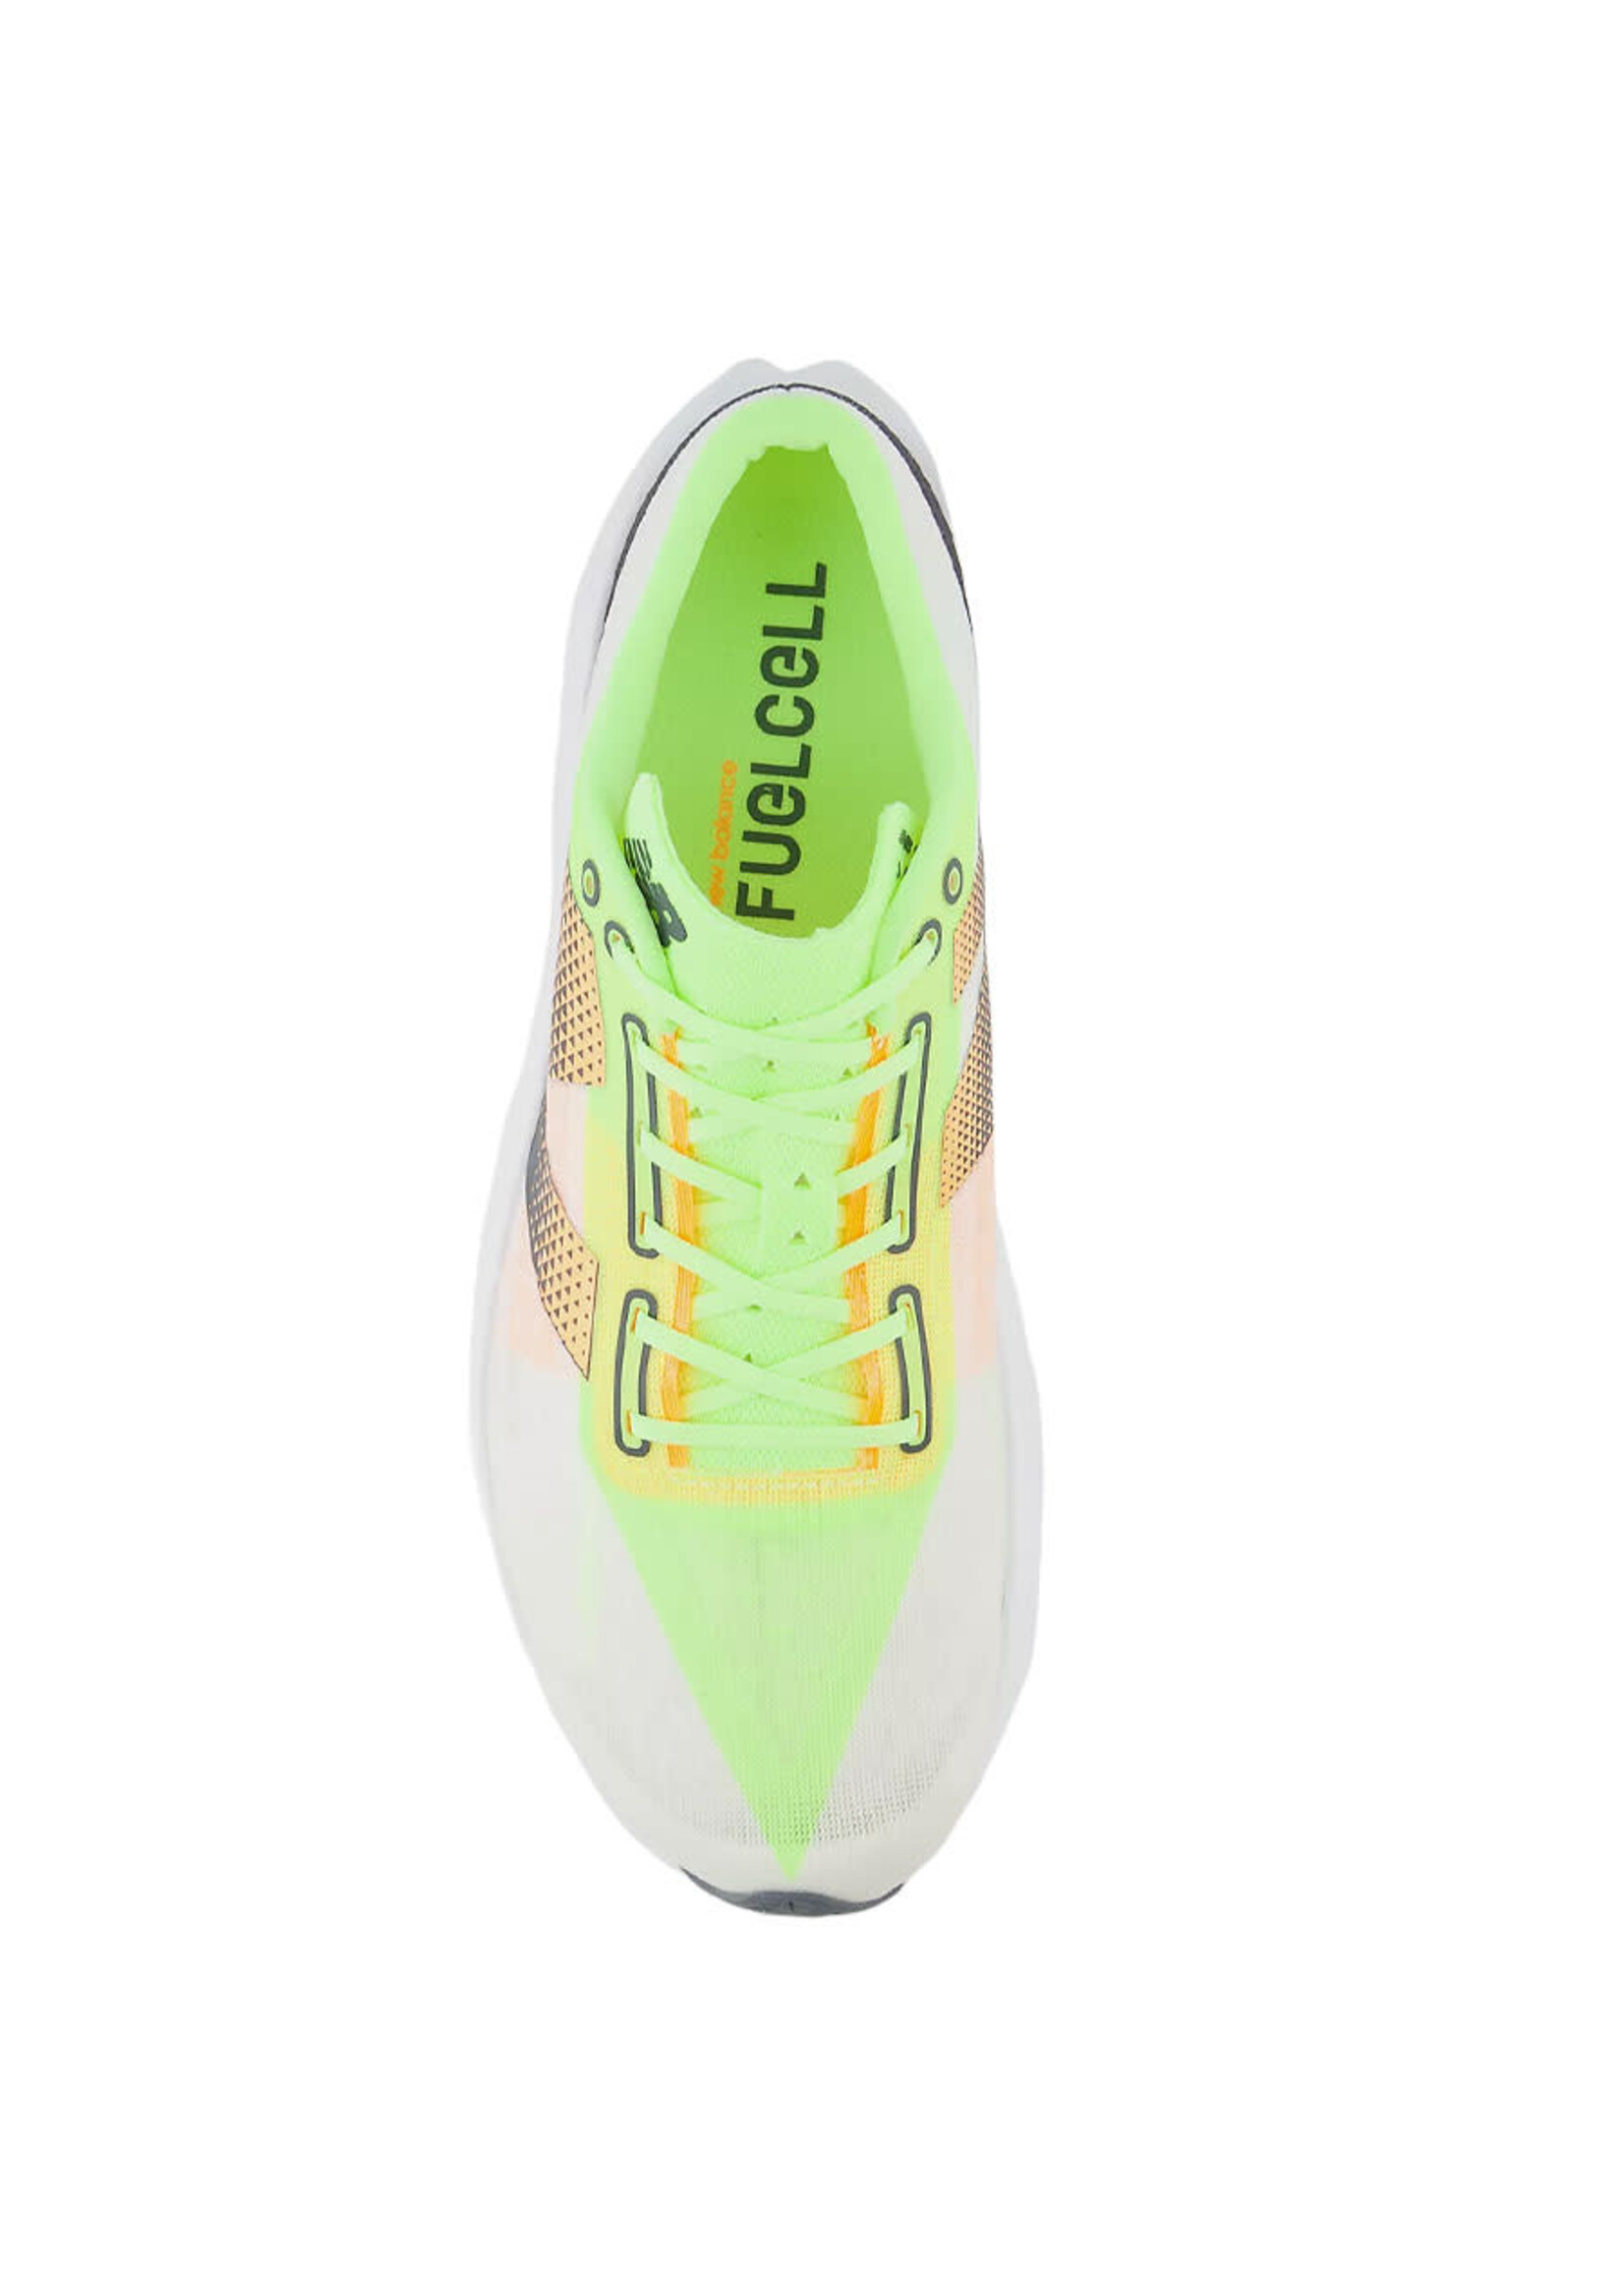 NEW BALANCE Souliers FUELCELL PVLSE V1 D / Vert Lime (Homme)